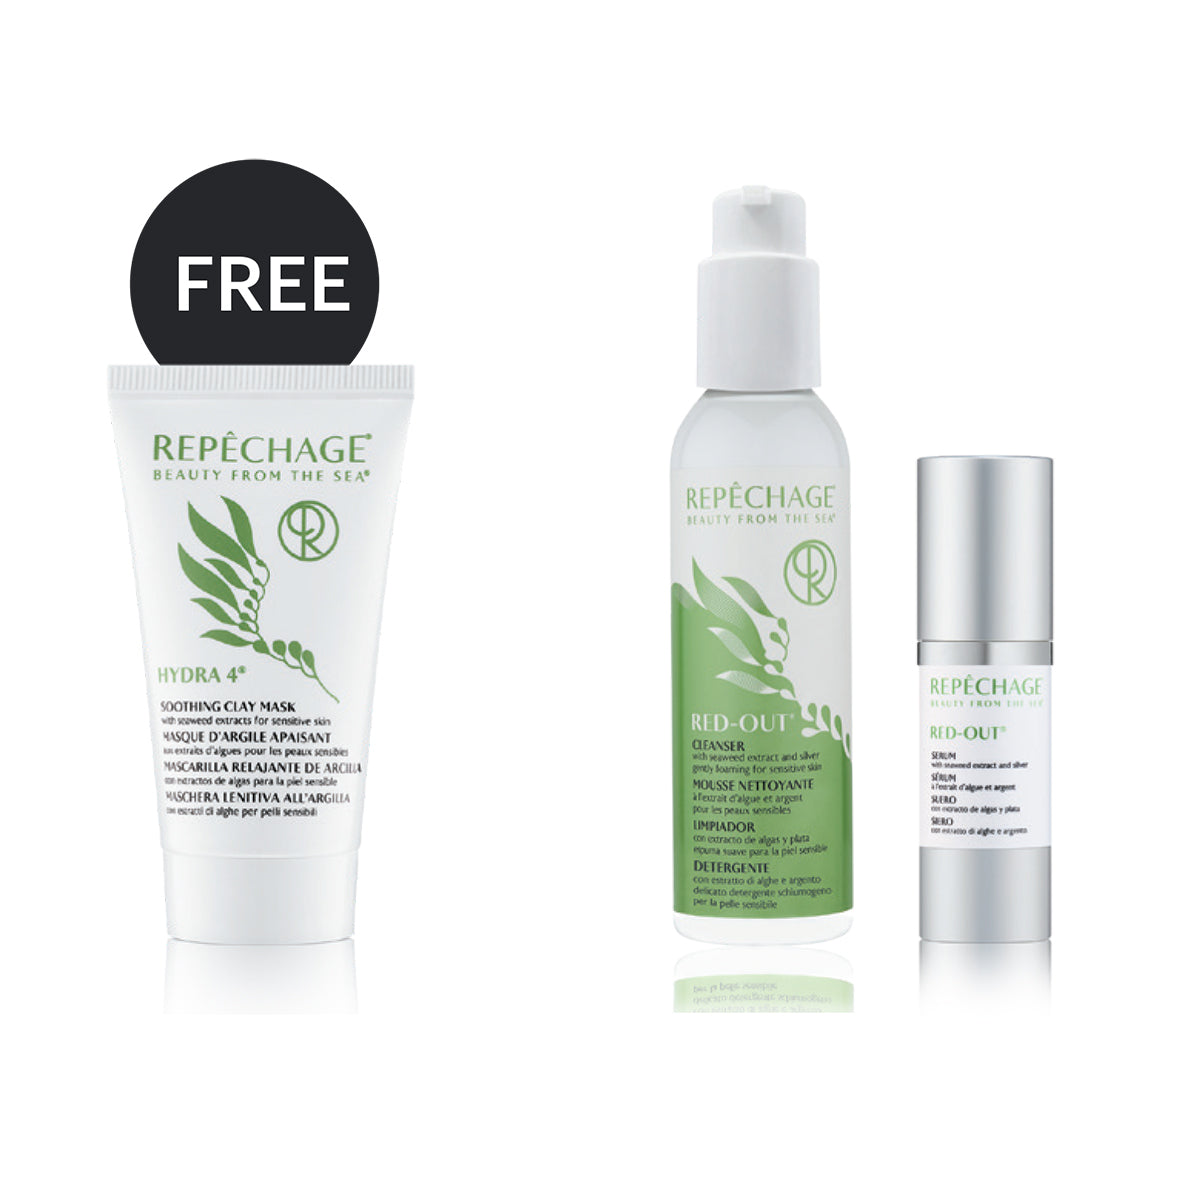 FREE Hydra 4® Soothing Clay Mask with Purchase of Red-Out® Cleanser and Red-Out® Serum